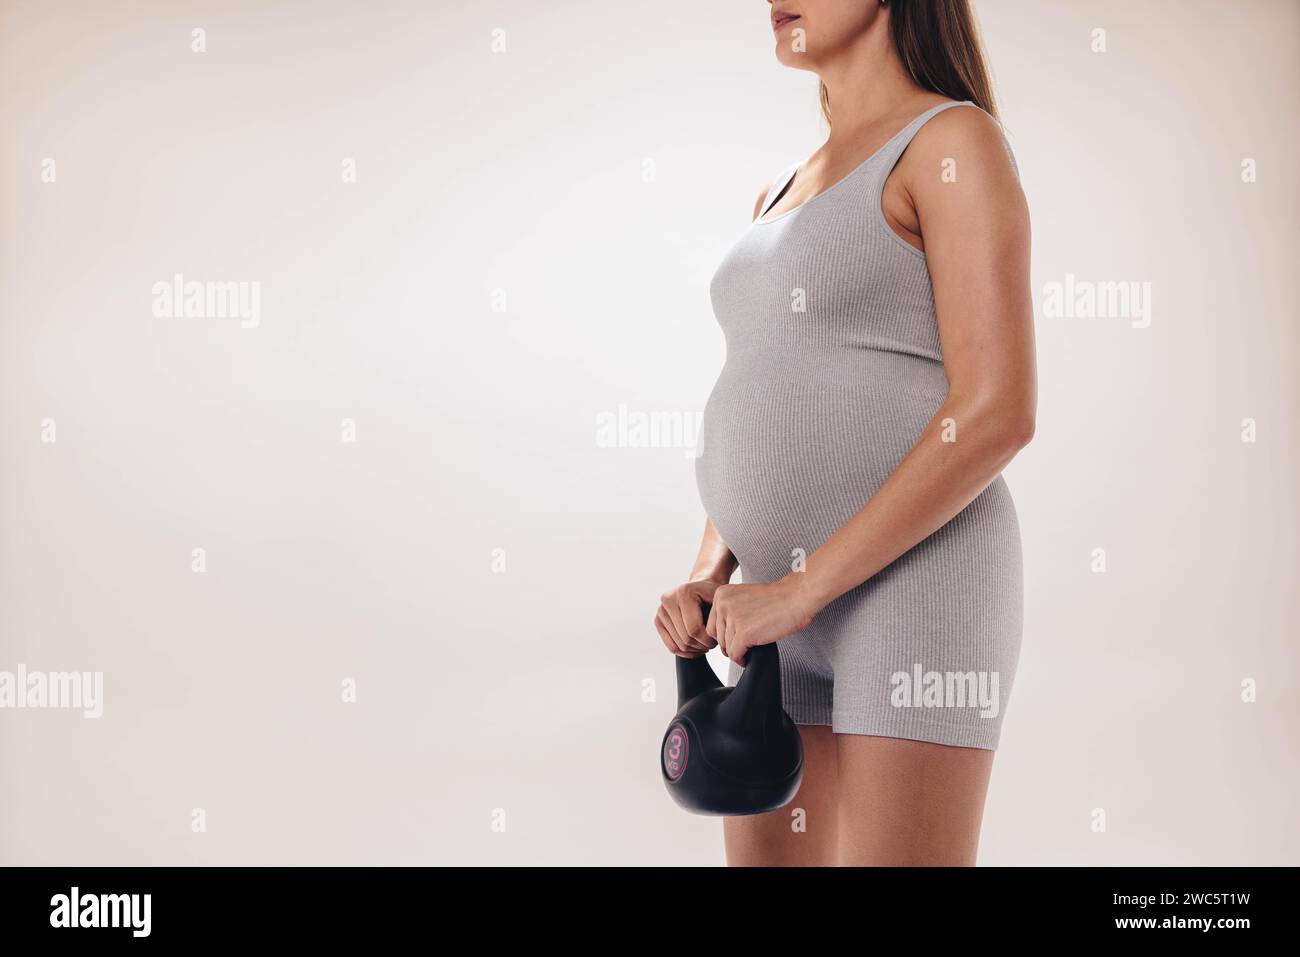 Woman with a baby bump practicing strength training and weightlifting for a healthy body during pregnancy. Wearing fitness clothing, she holds a dumbb Stock Photo